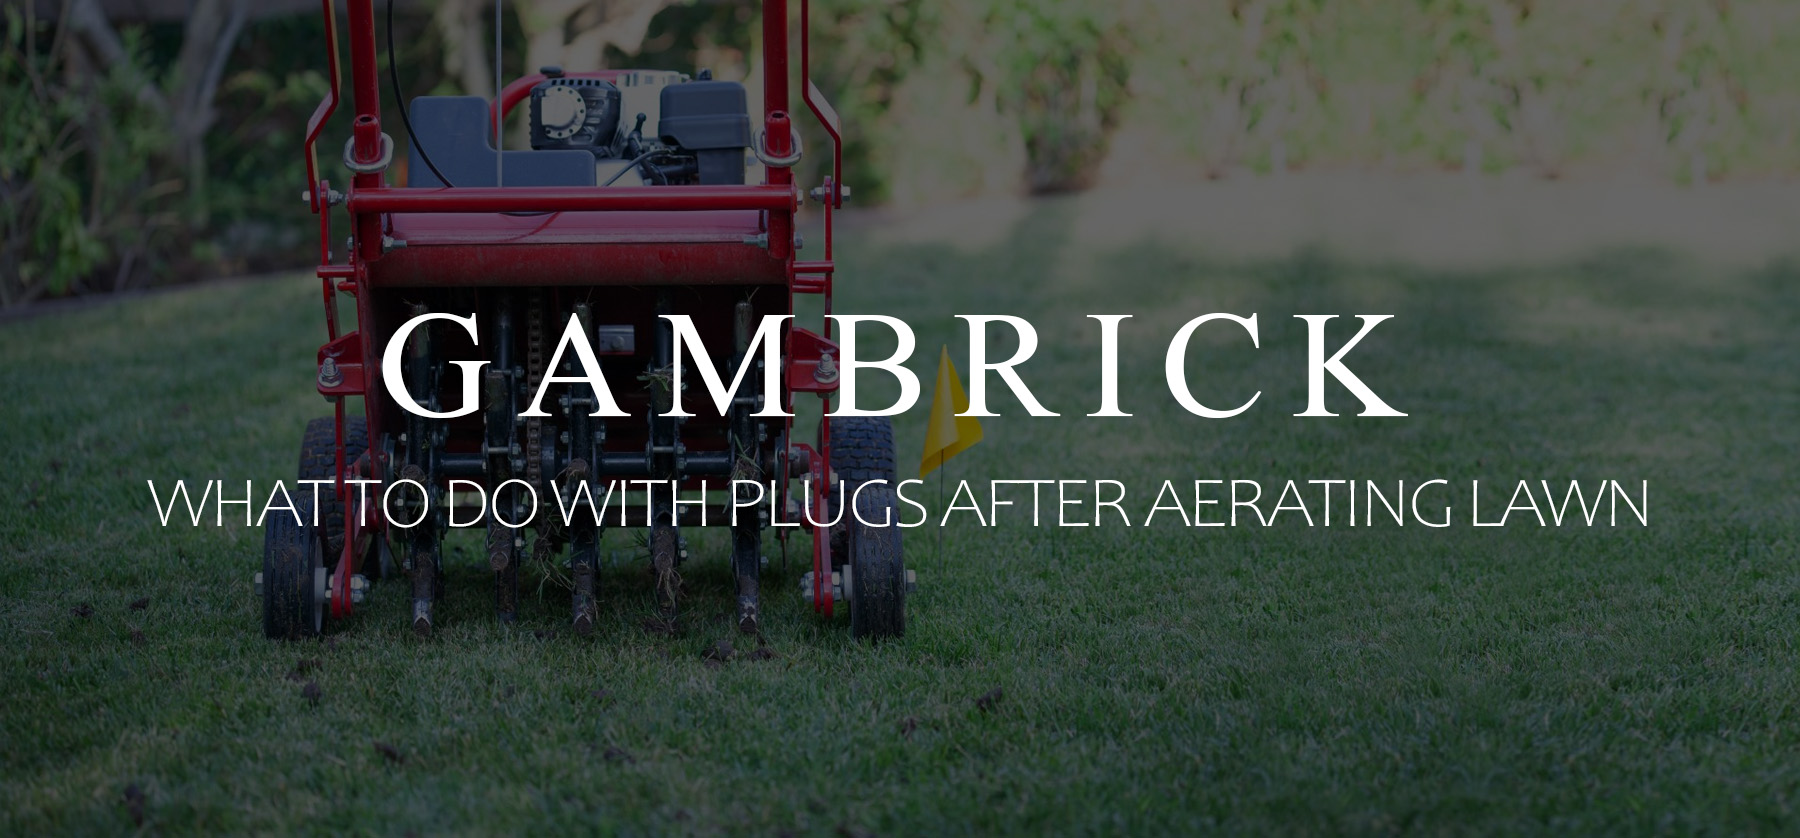 what to do with plugs after aerating lawn banner 1.0